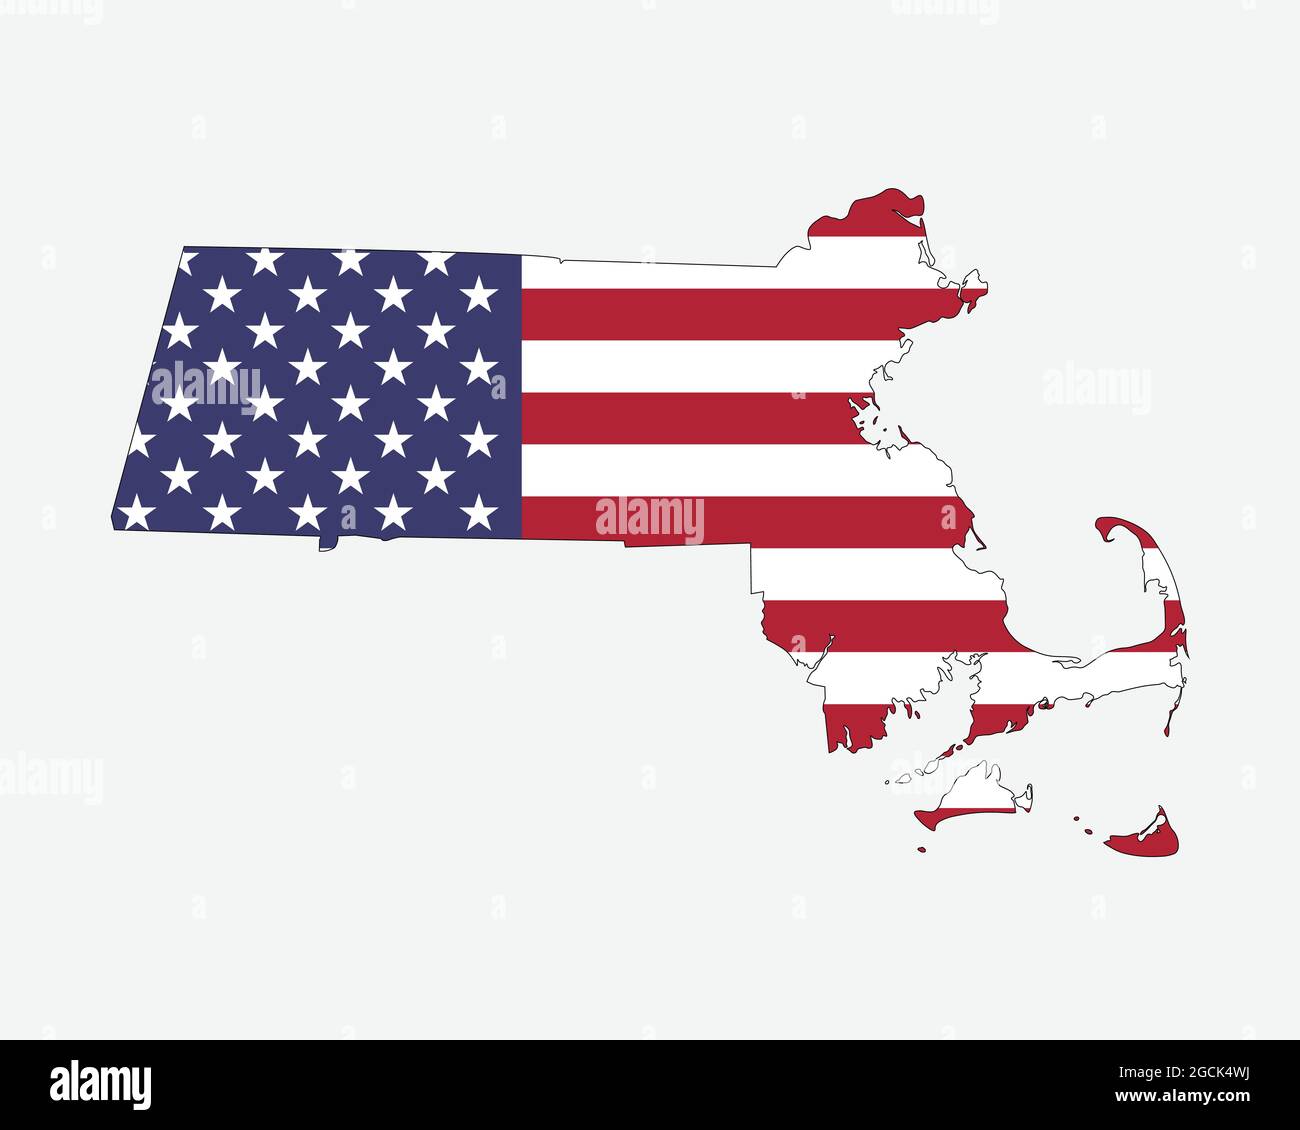 Massachusetts Map American Flag. MA, USA State Map on US Flag. EPS Vector Graphic Clipart Icon Stock Vector